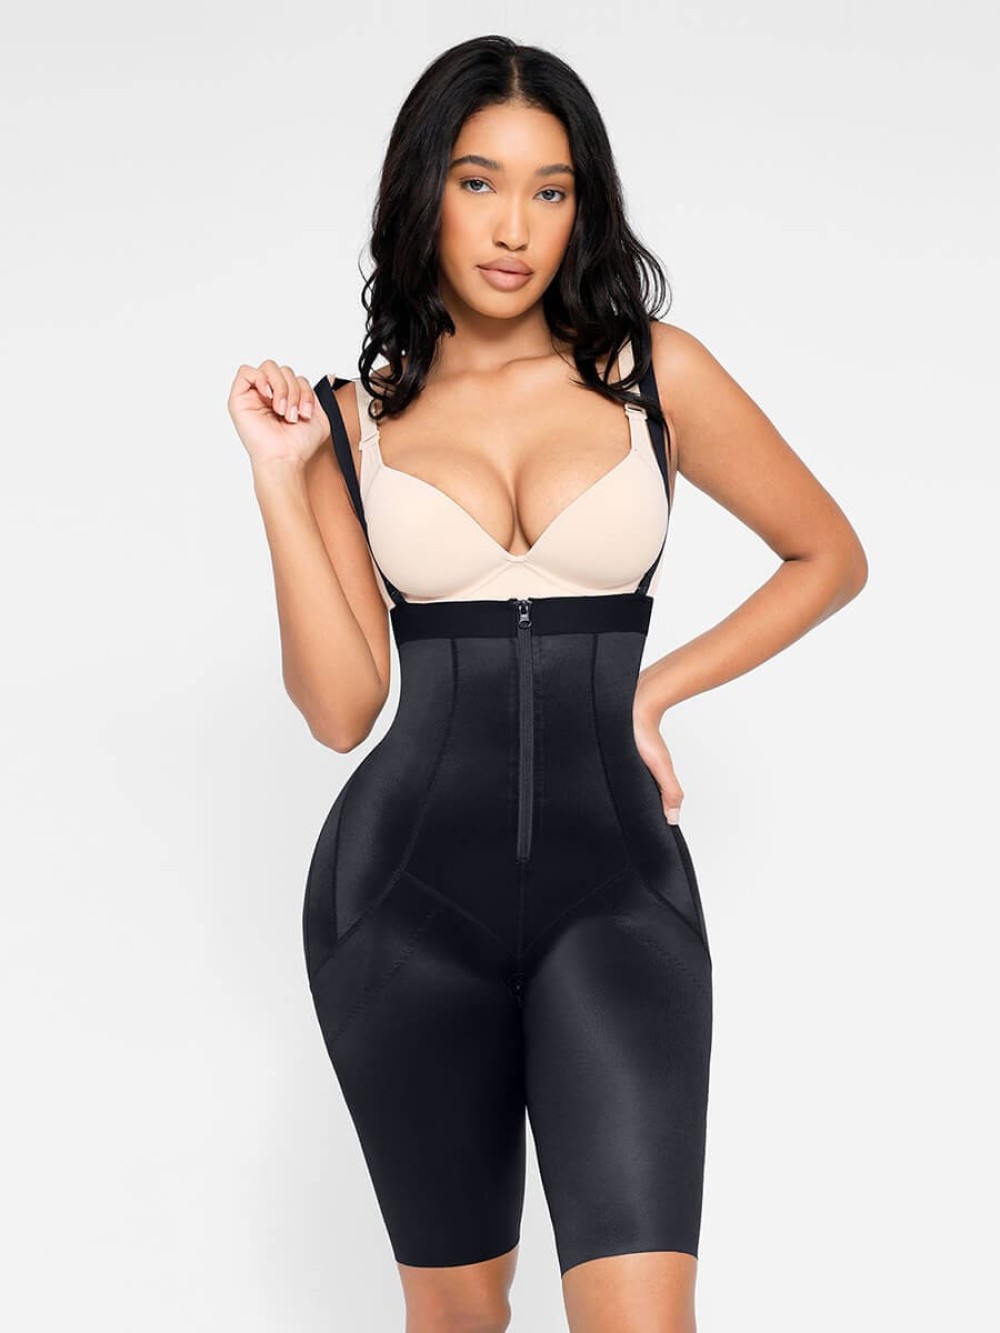 Body Shaper clips inside for post-operative wear and removable shoulder straps